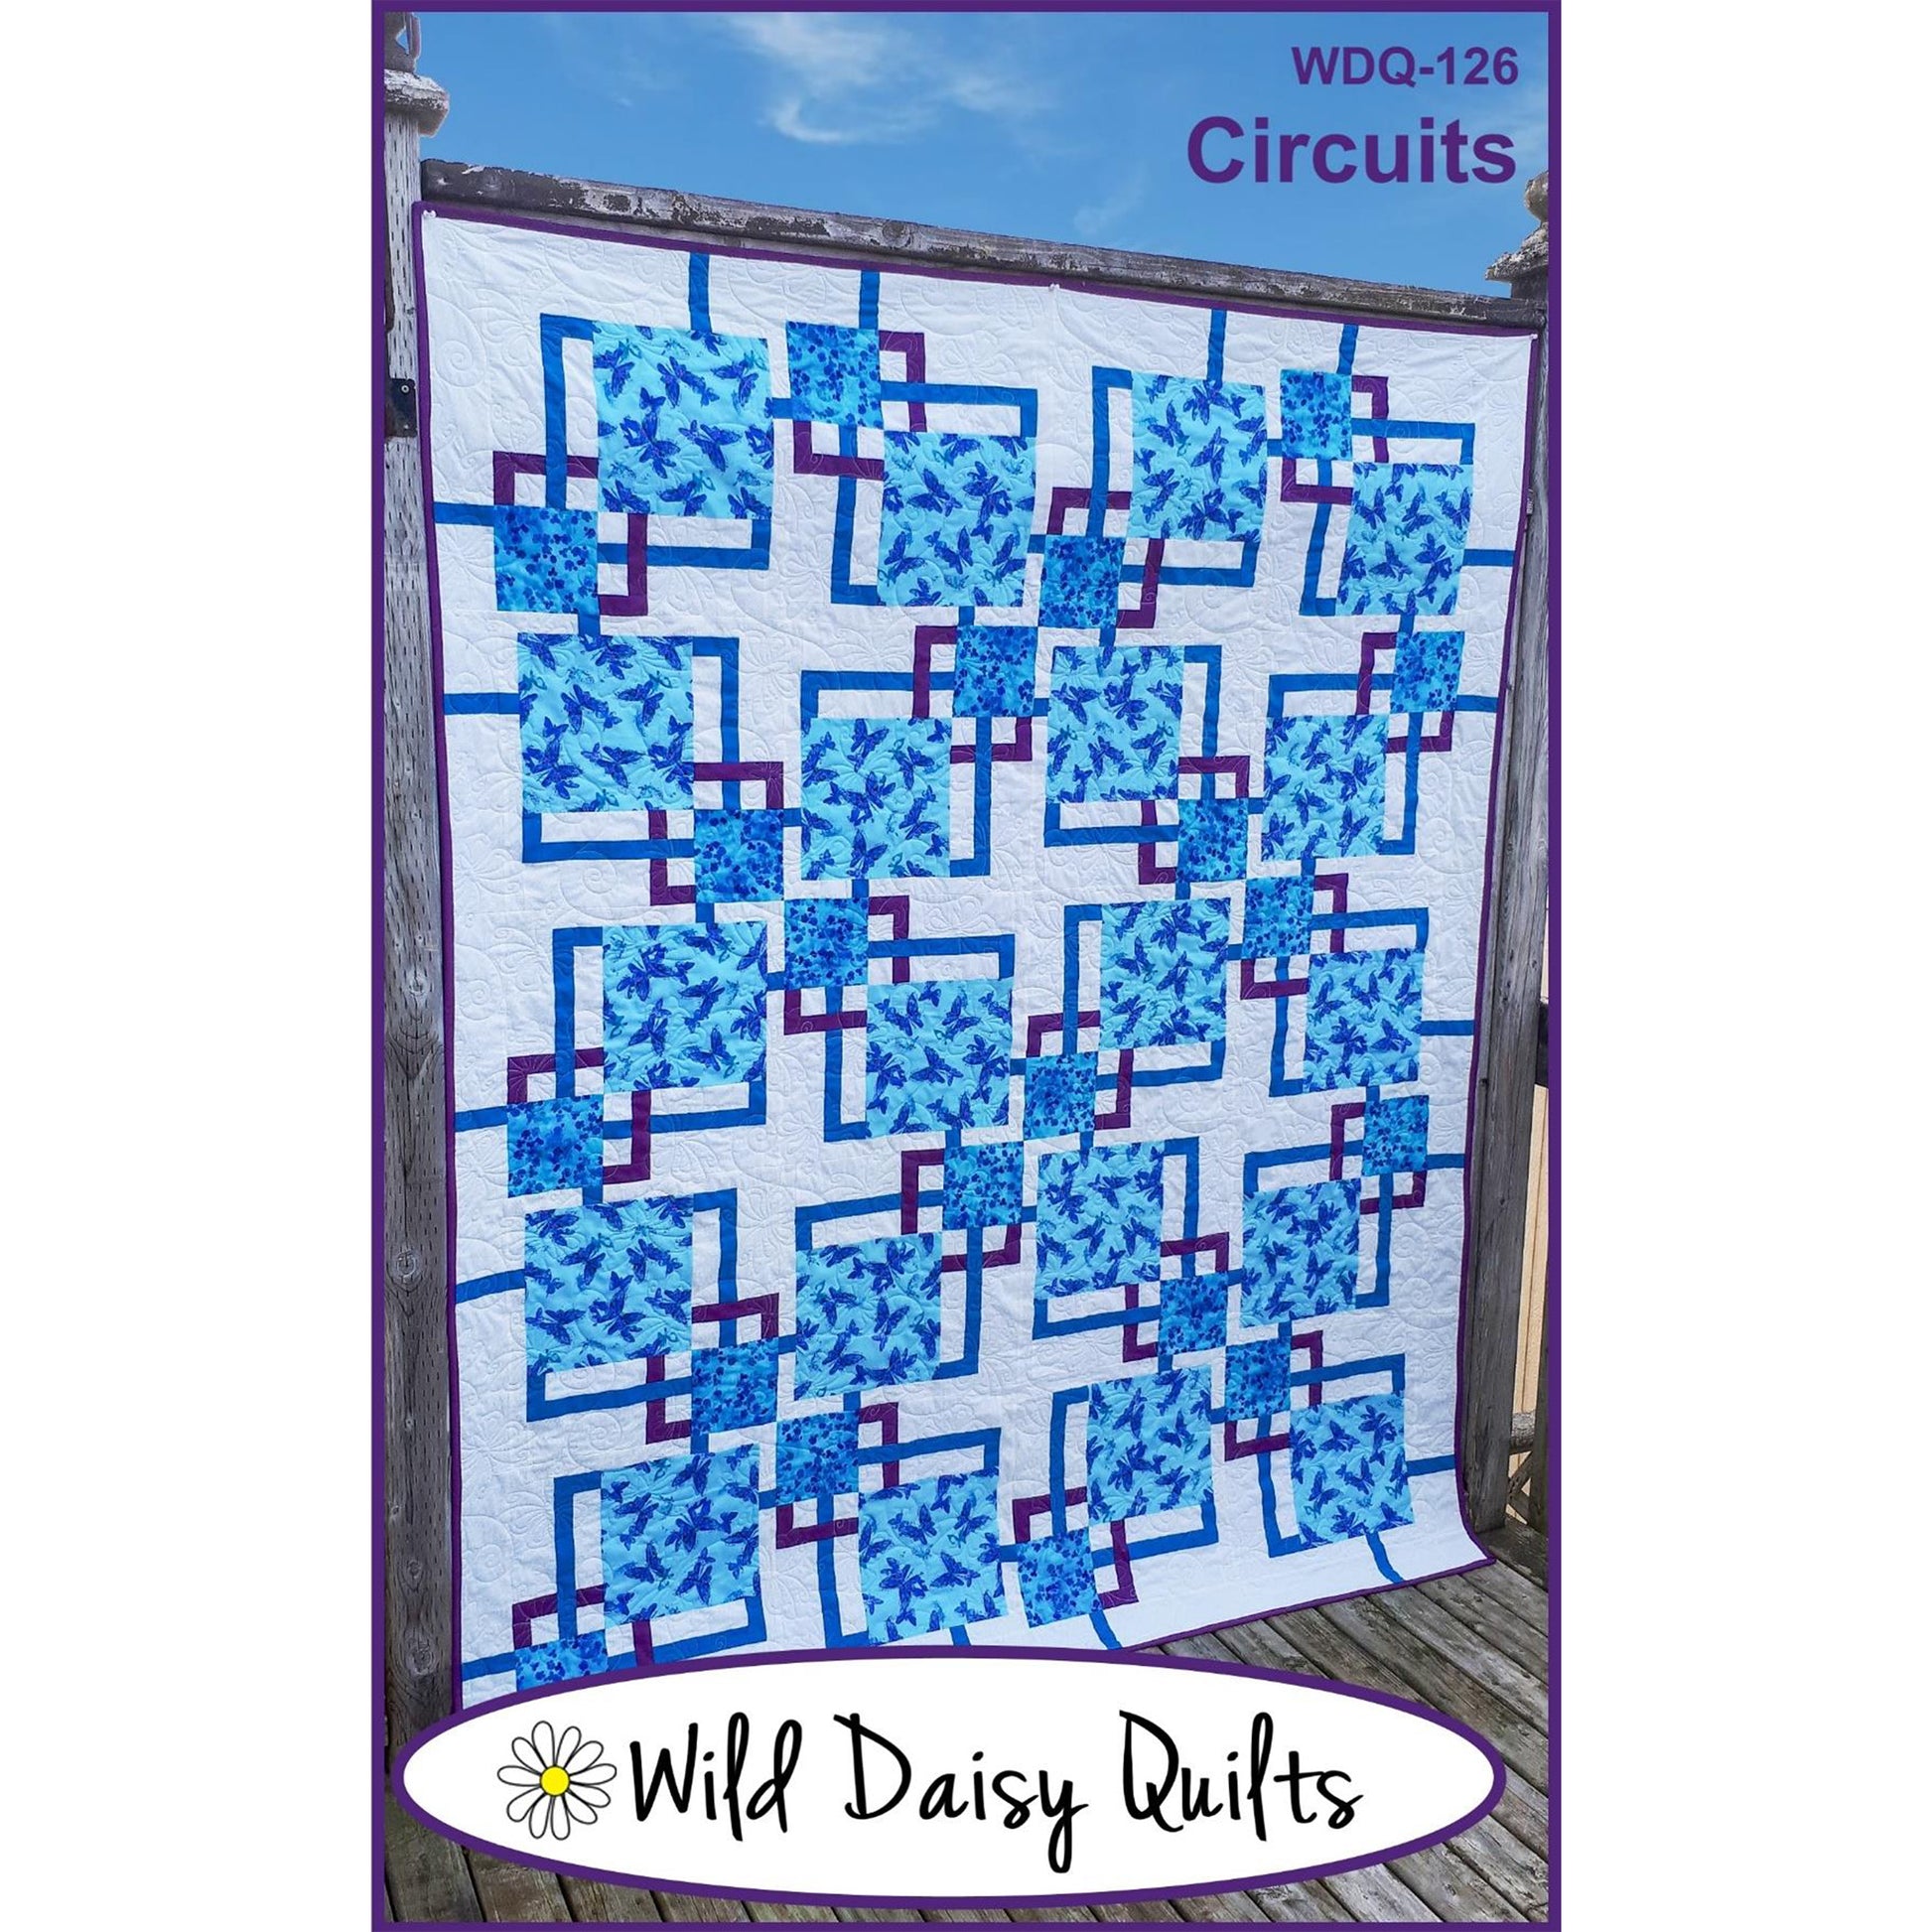 Cover image of the Circuits quilt pattern by Wild Daisy Quilts